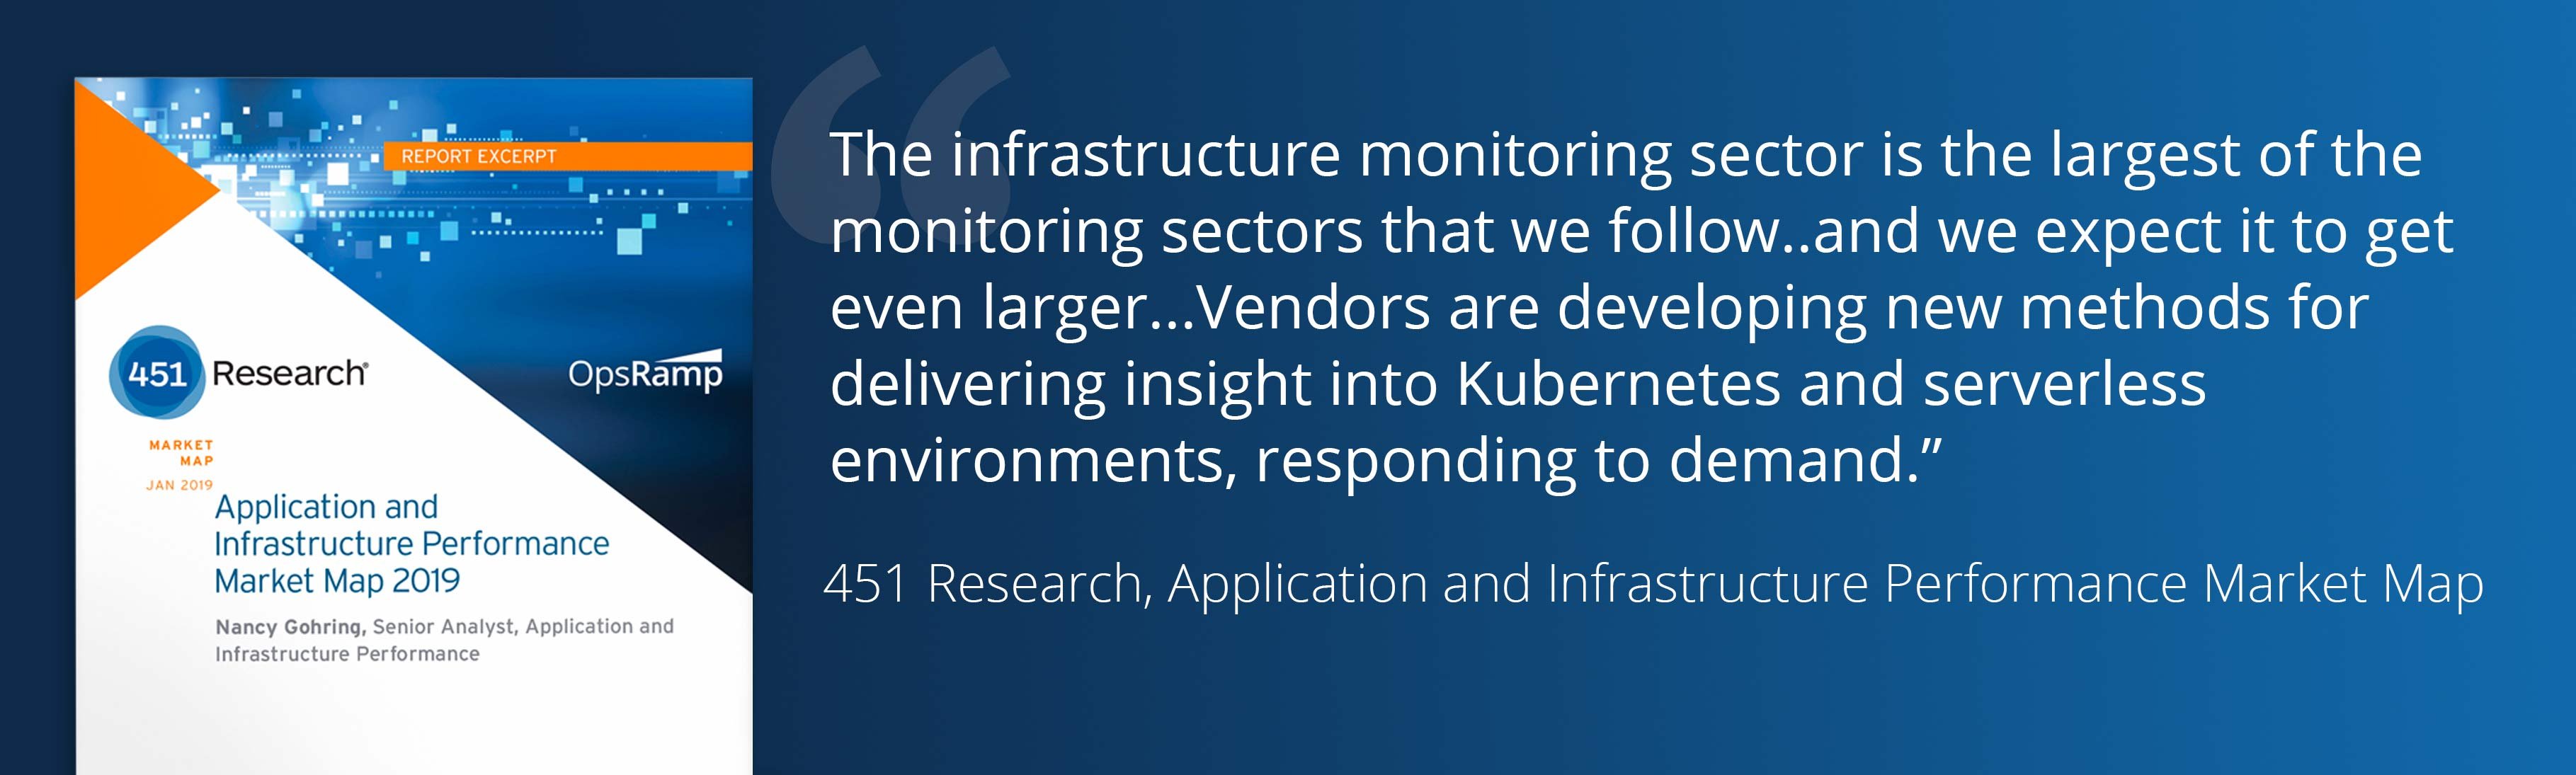 Infrastructure Monitoring